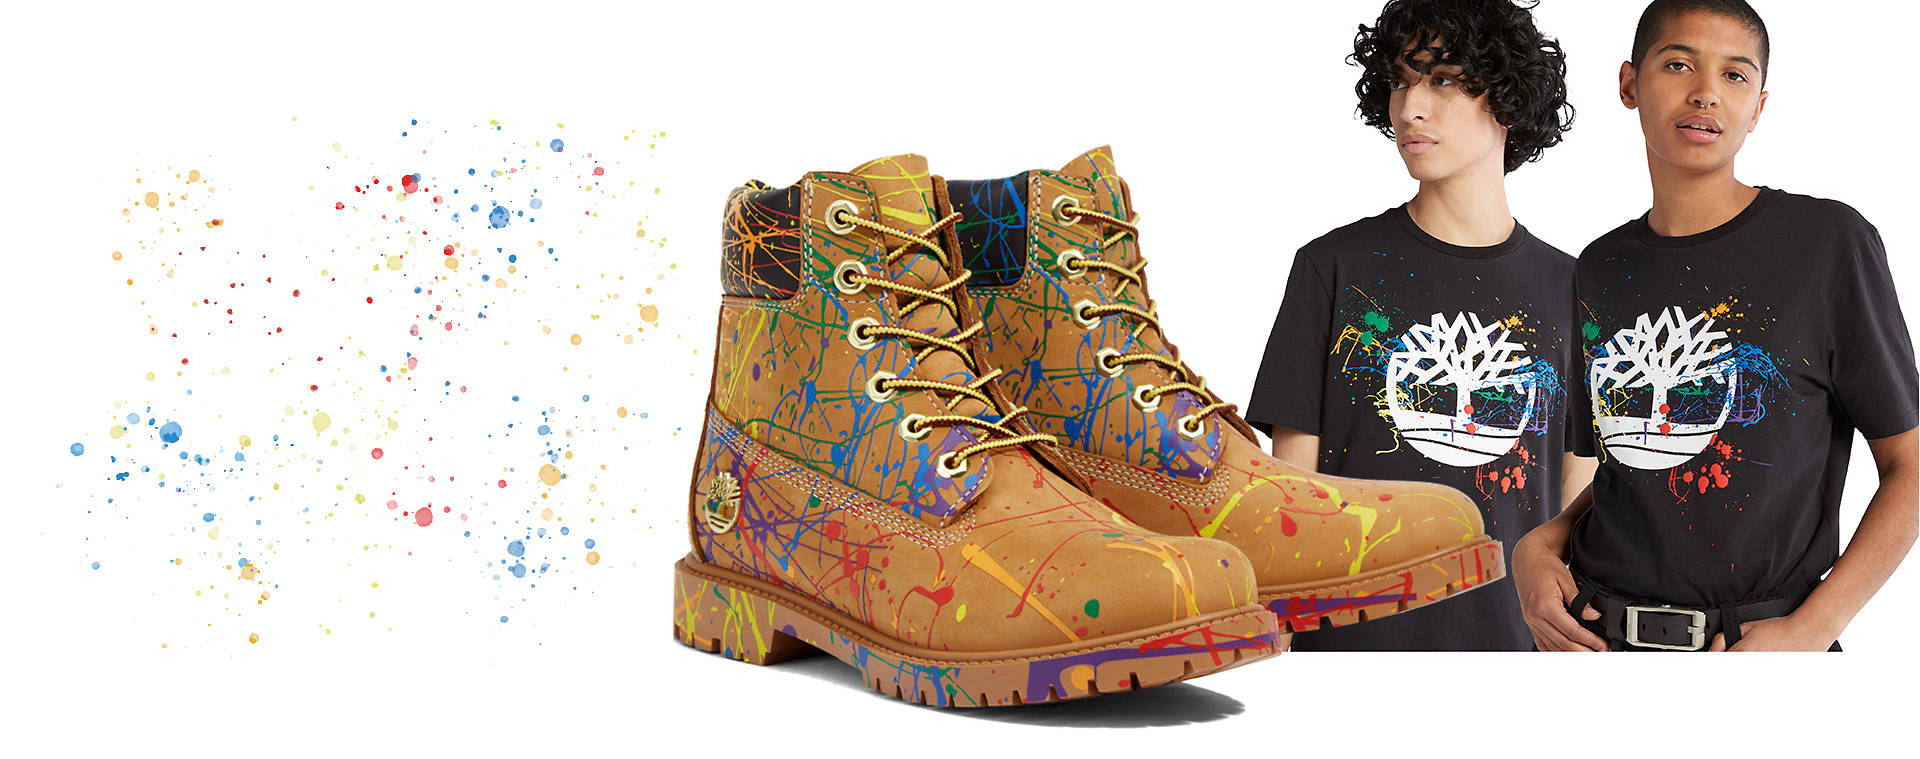 Image of wheat boots with multicolor splatter paint designs against a white background and two male models wearing black splatter paint t-shirts with Timberland logos.